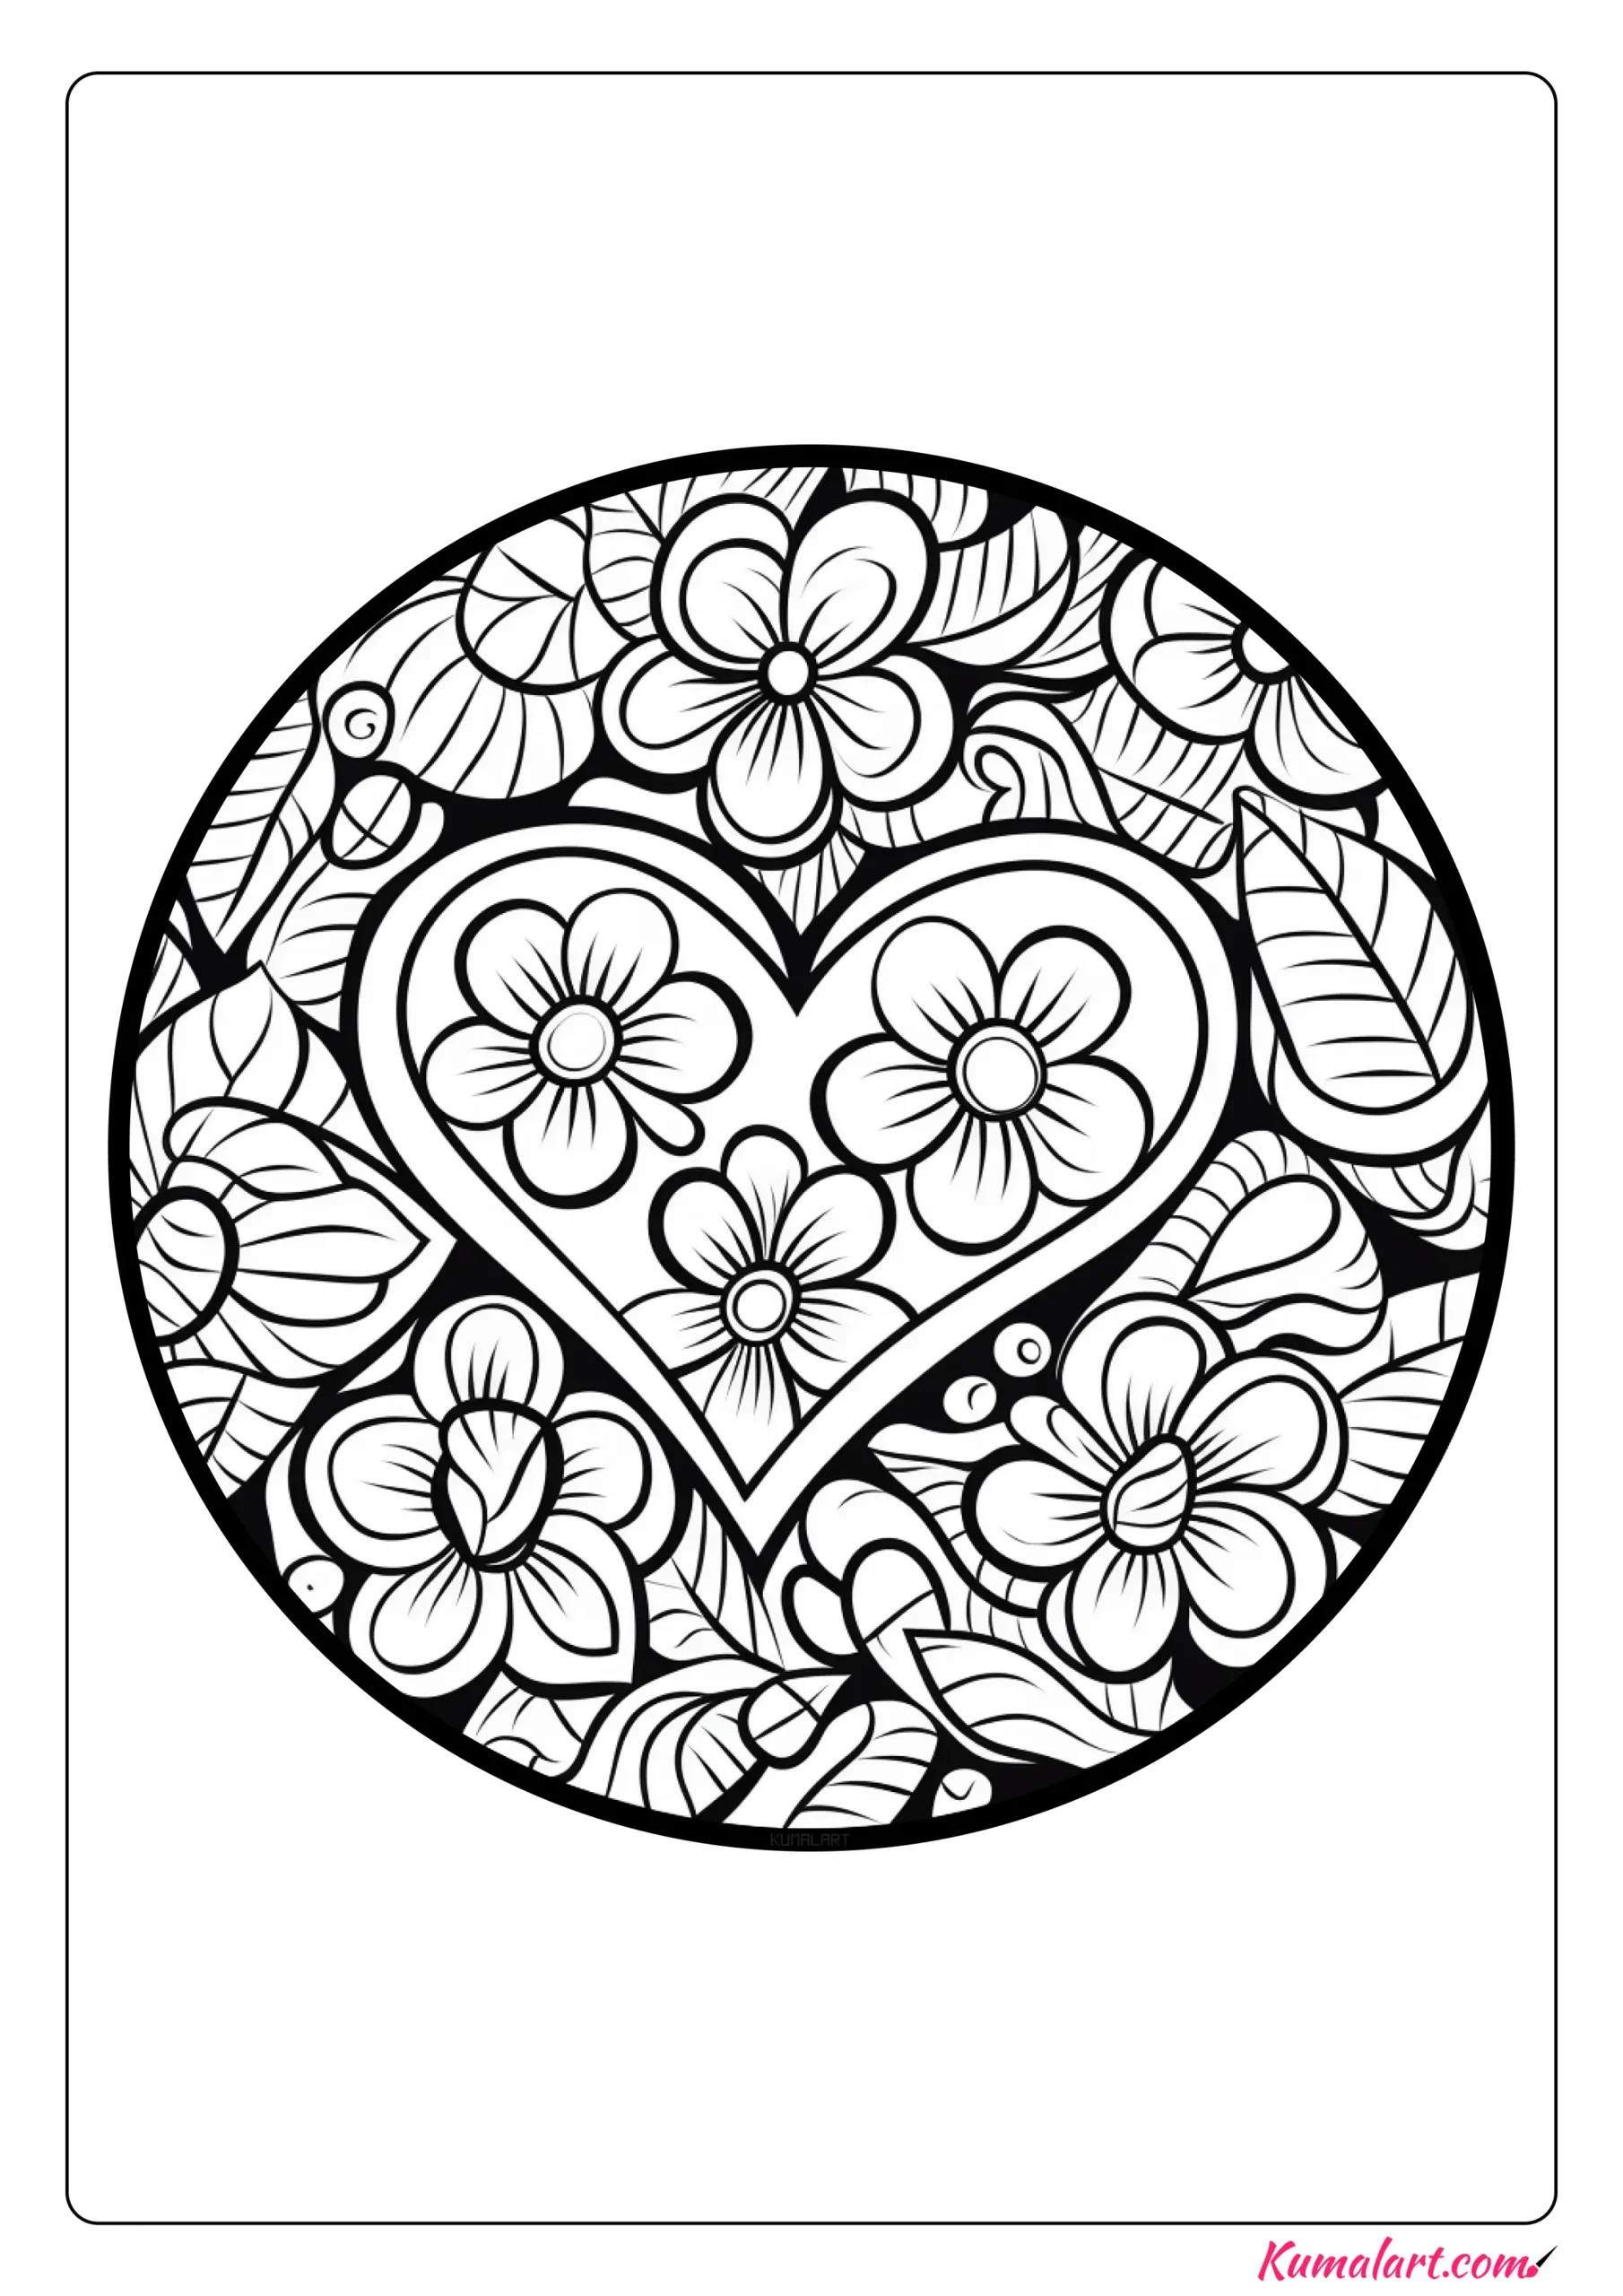 Ð free a holiday mandala coloring pages